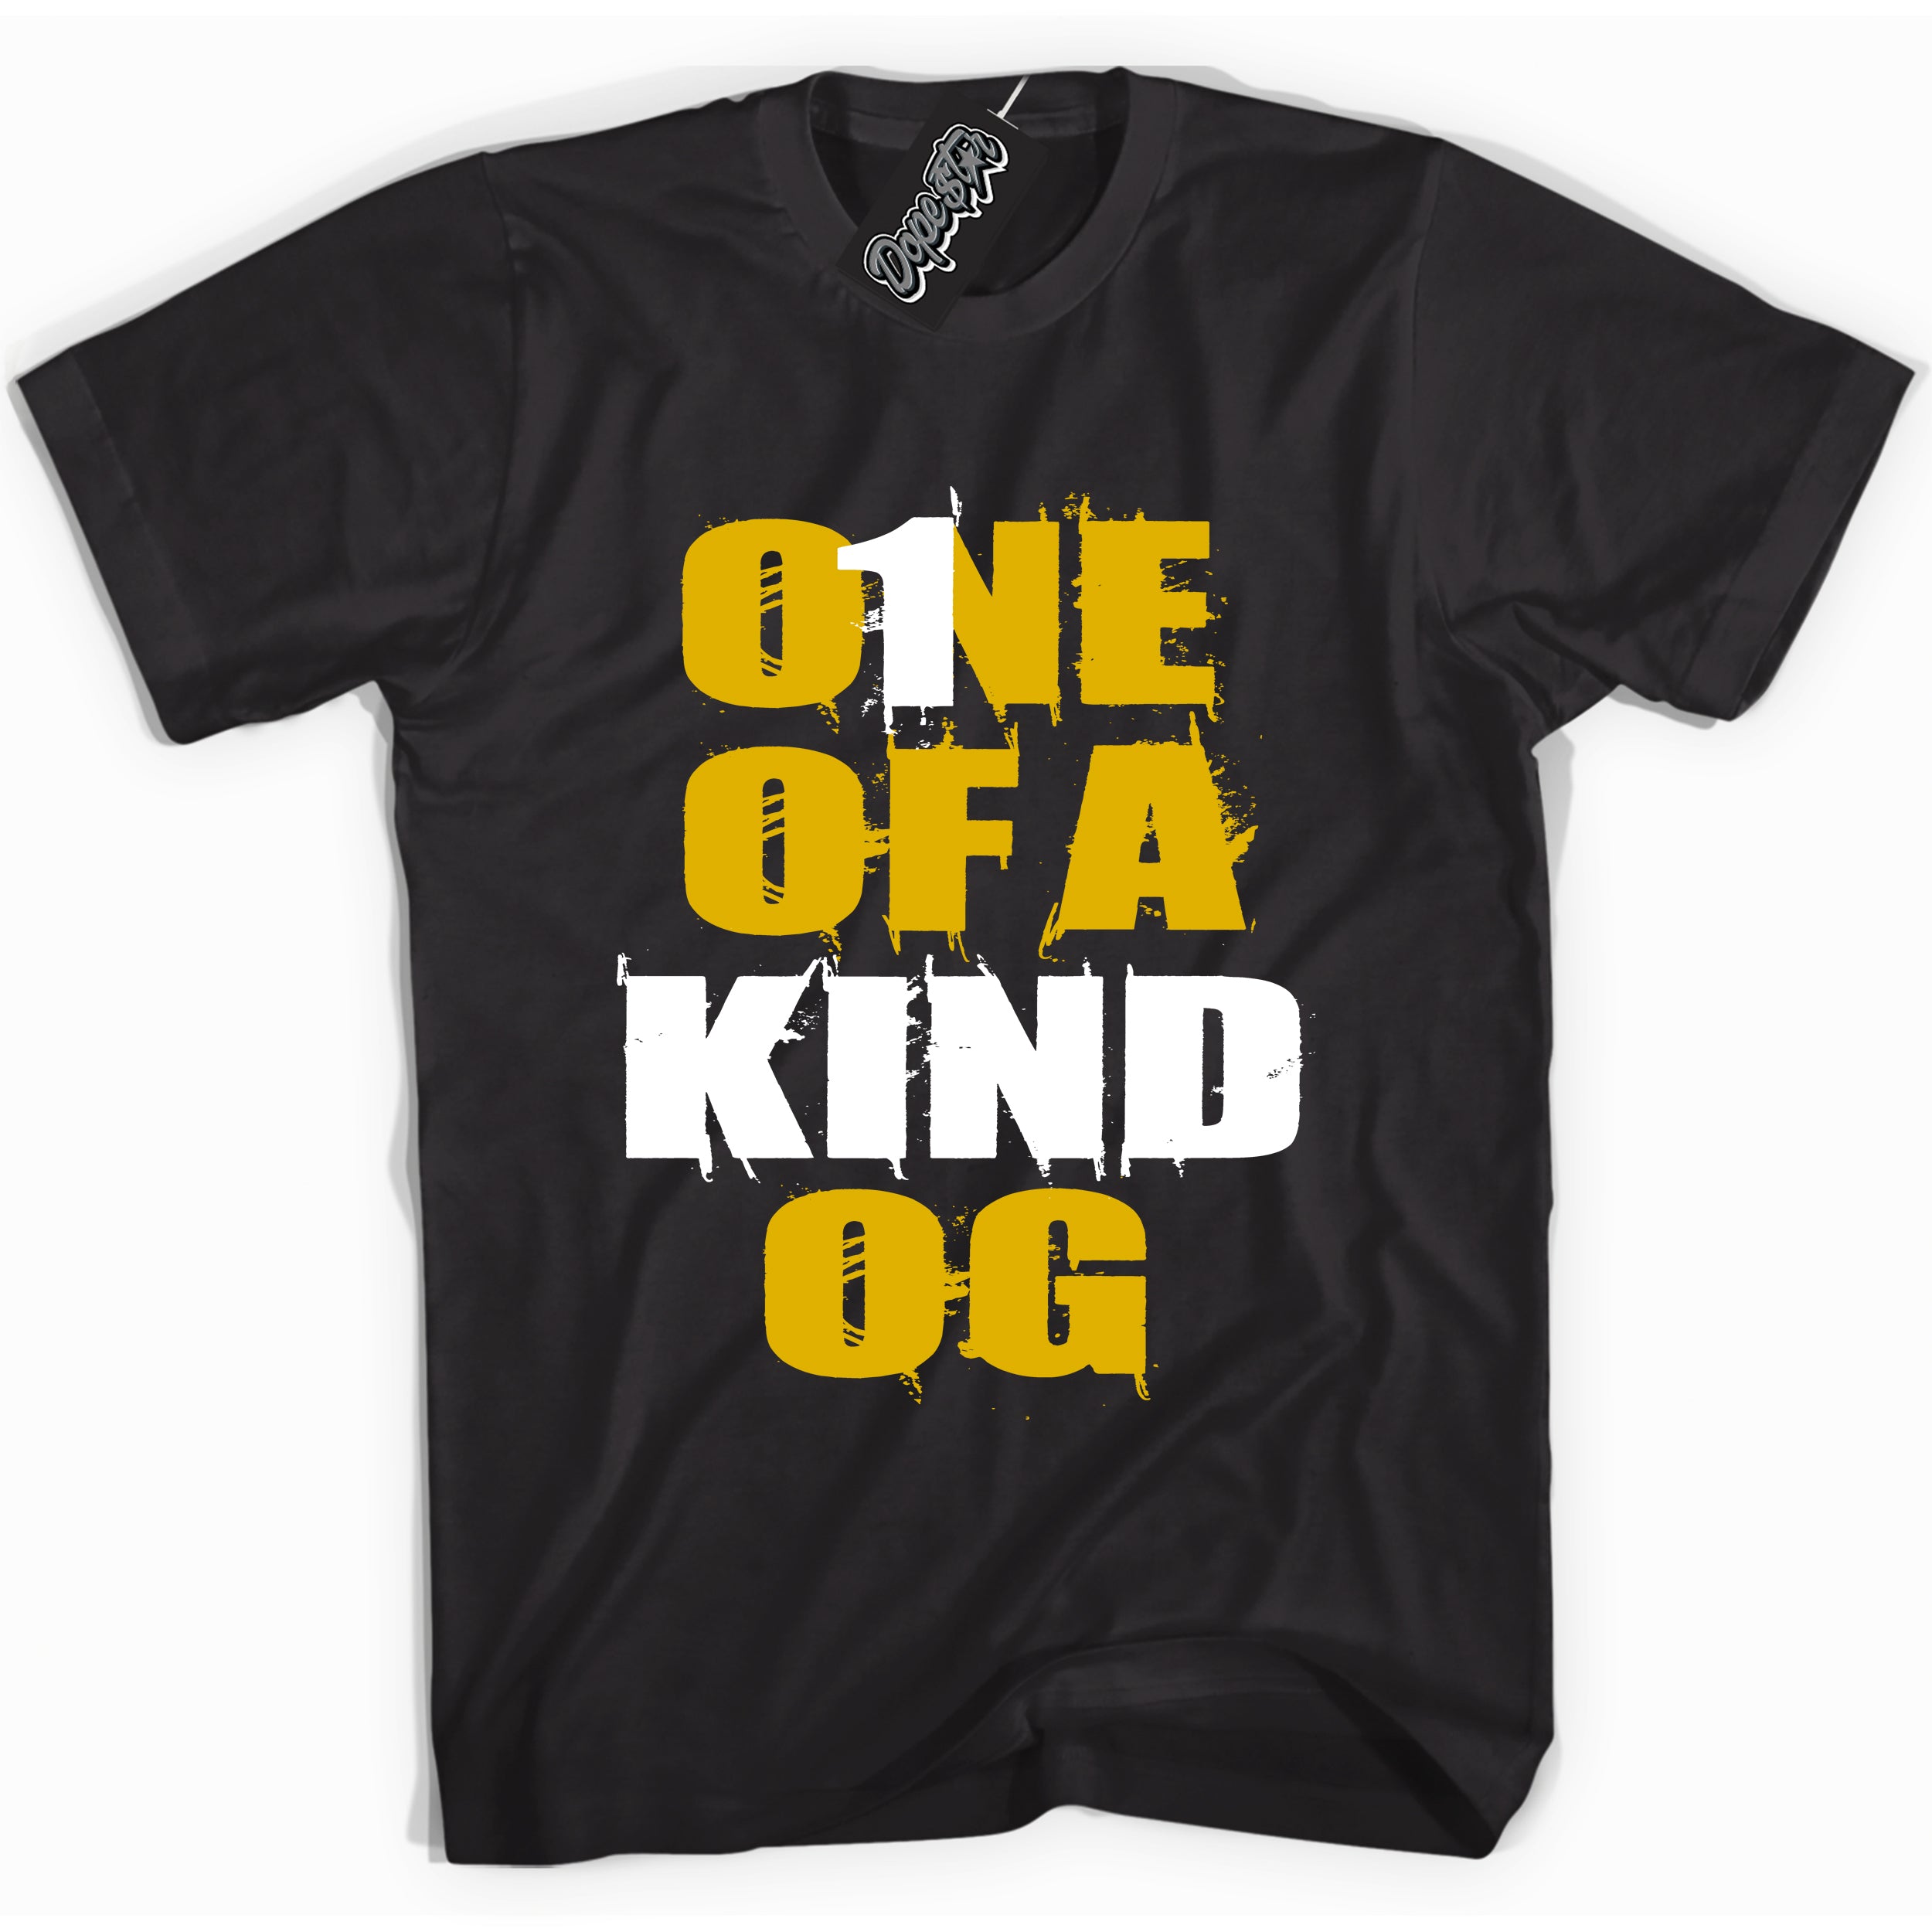 Cool black Shirt With “ One Of A Kind” design that perfectly matches Yellow Ochre 6s Sneakers.